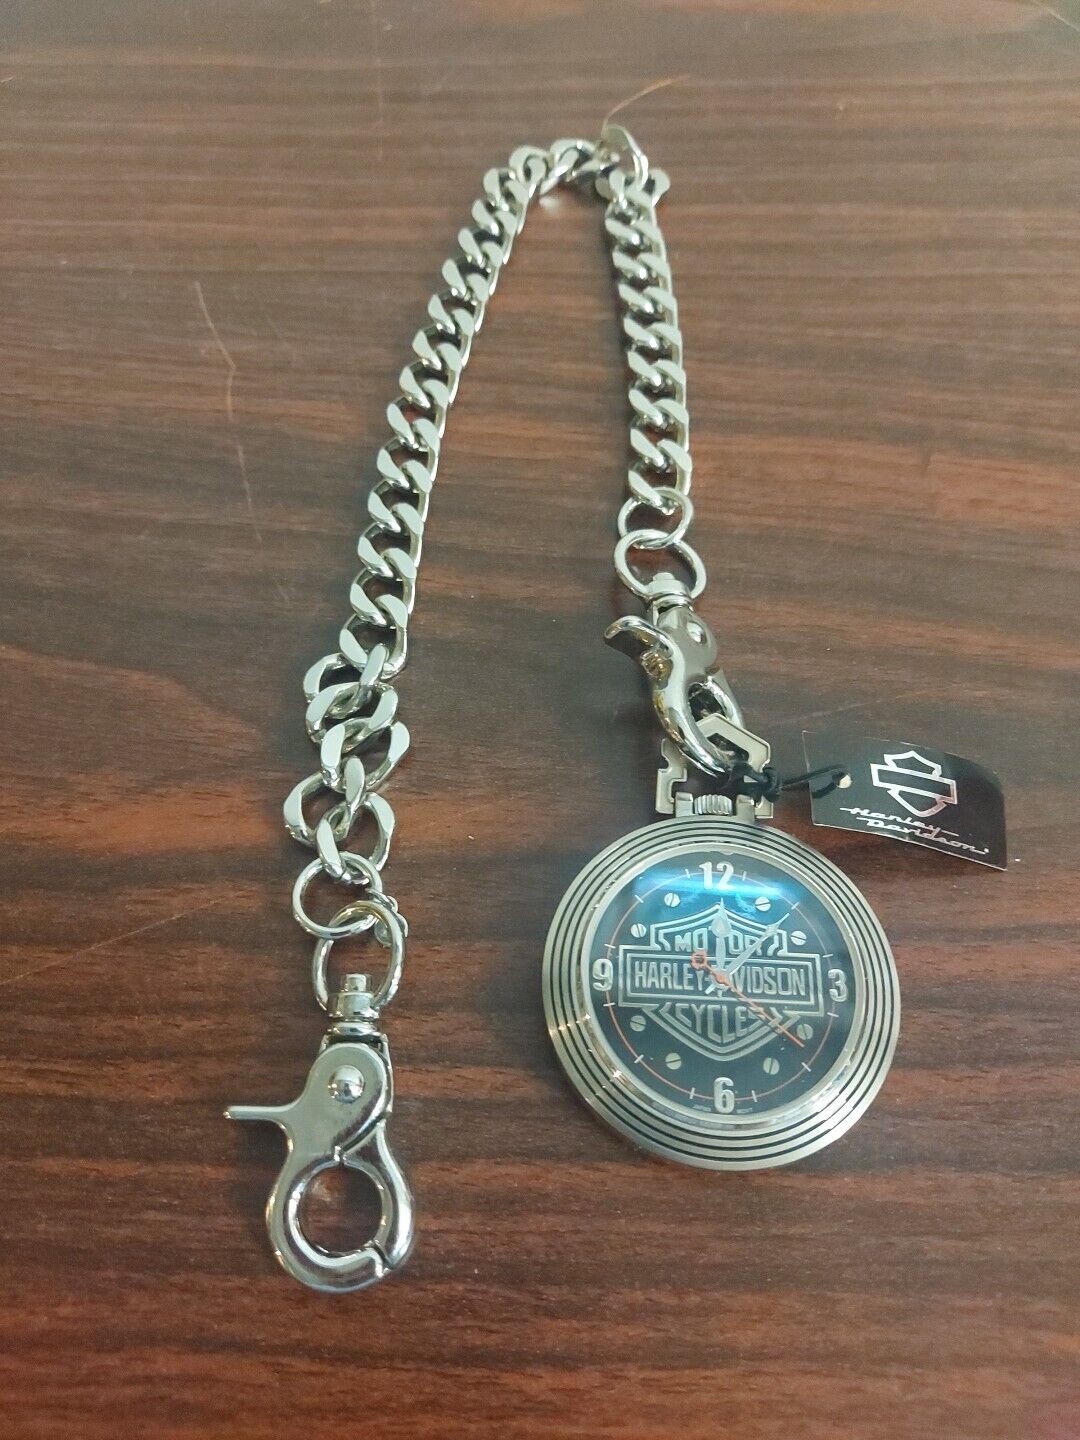 Harley Davidson 100th Anniversary Collector Pocket Watch With Tag 16in Chain